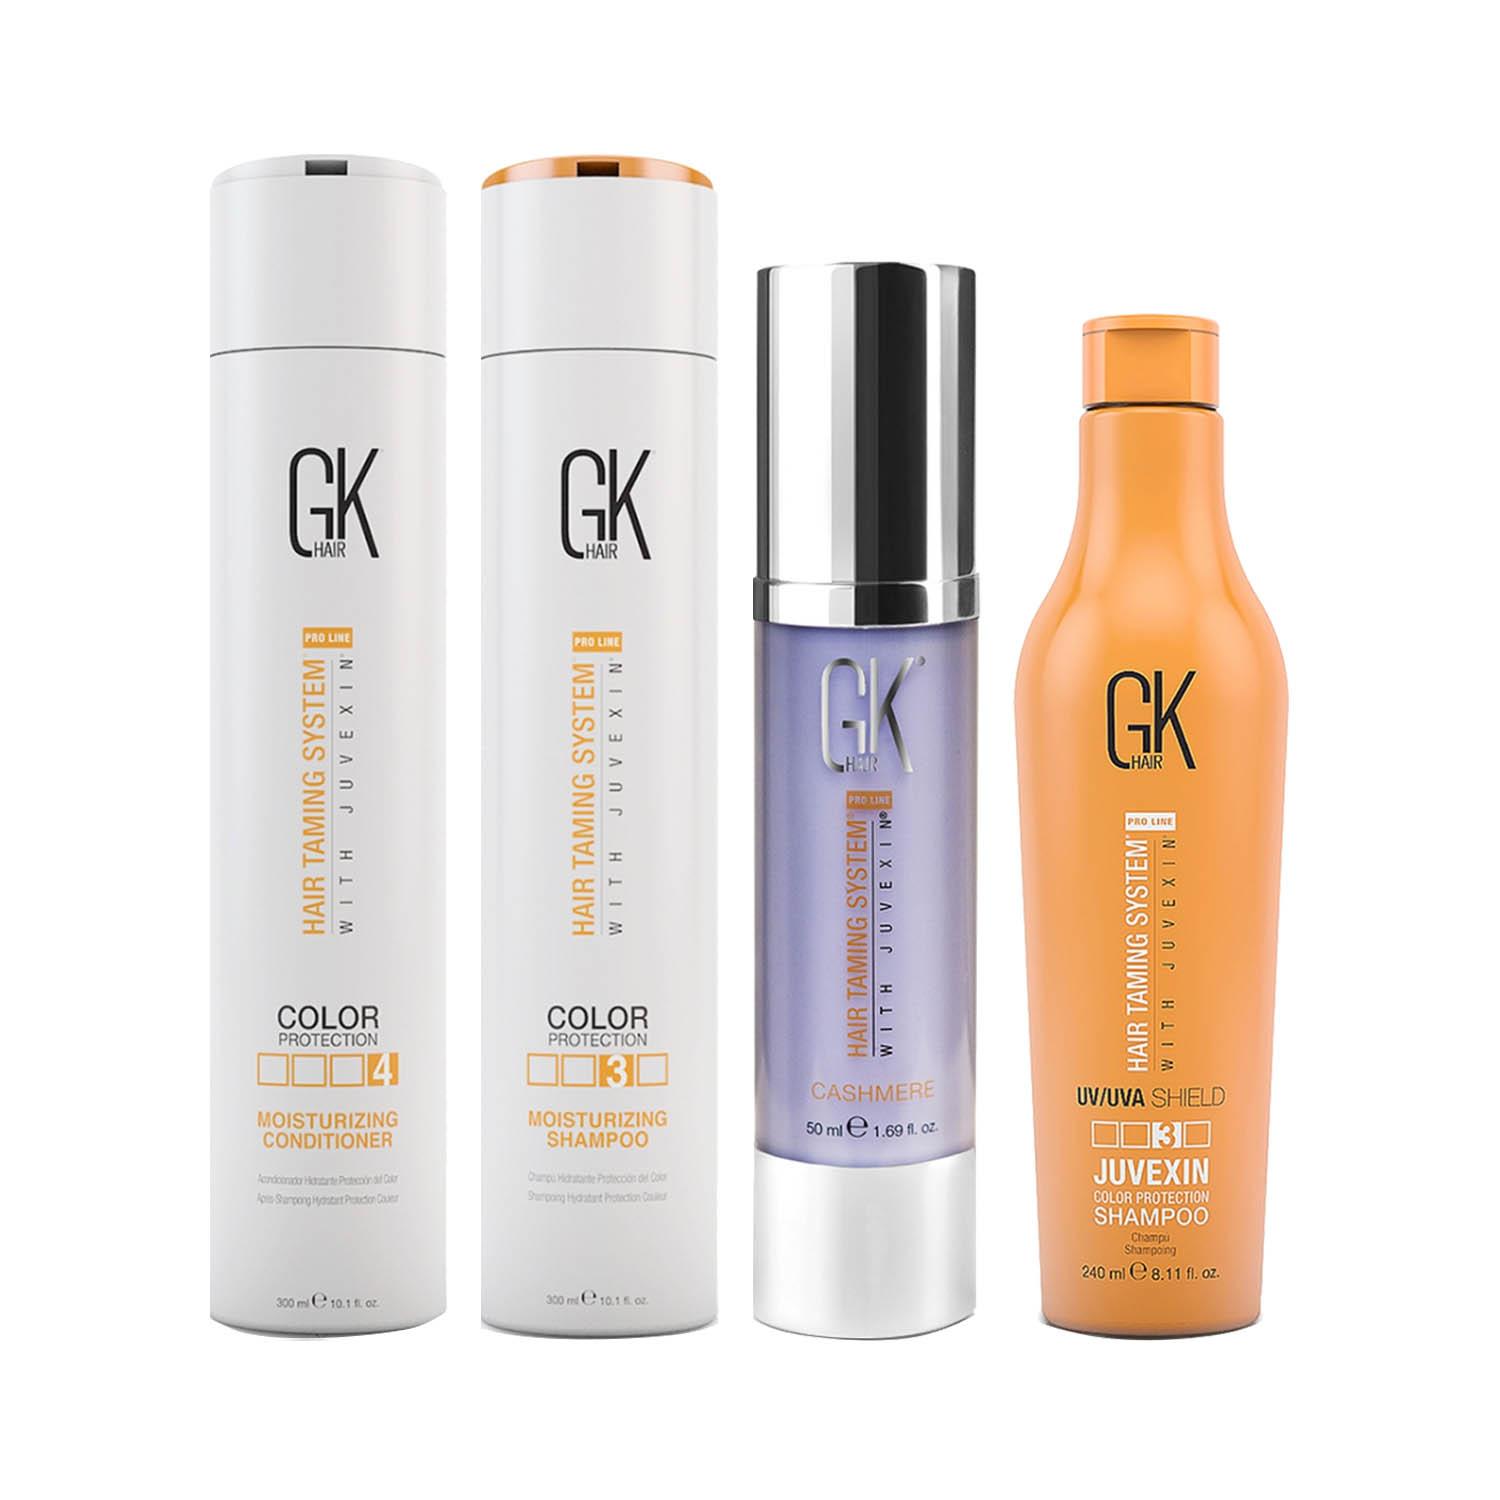 GK Hair Moisturizing Shampoo and Conditioner 300ml with Cashmere 50ml and Color Shield Shampoo 240ml